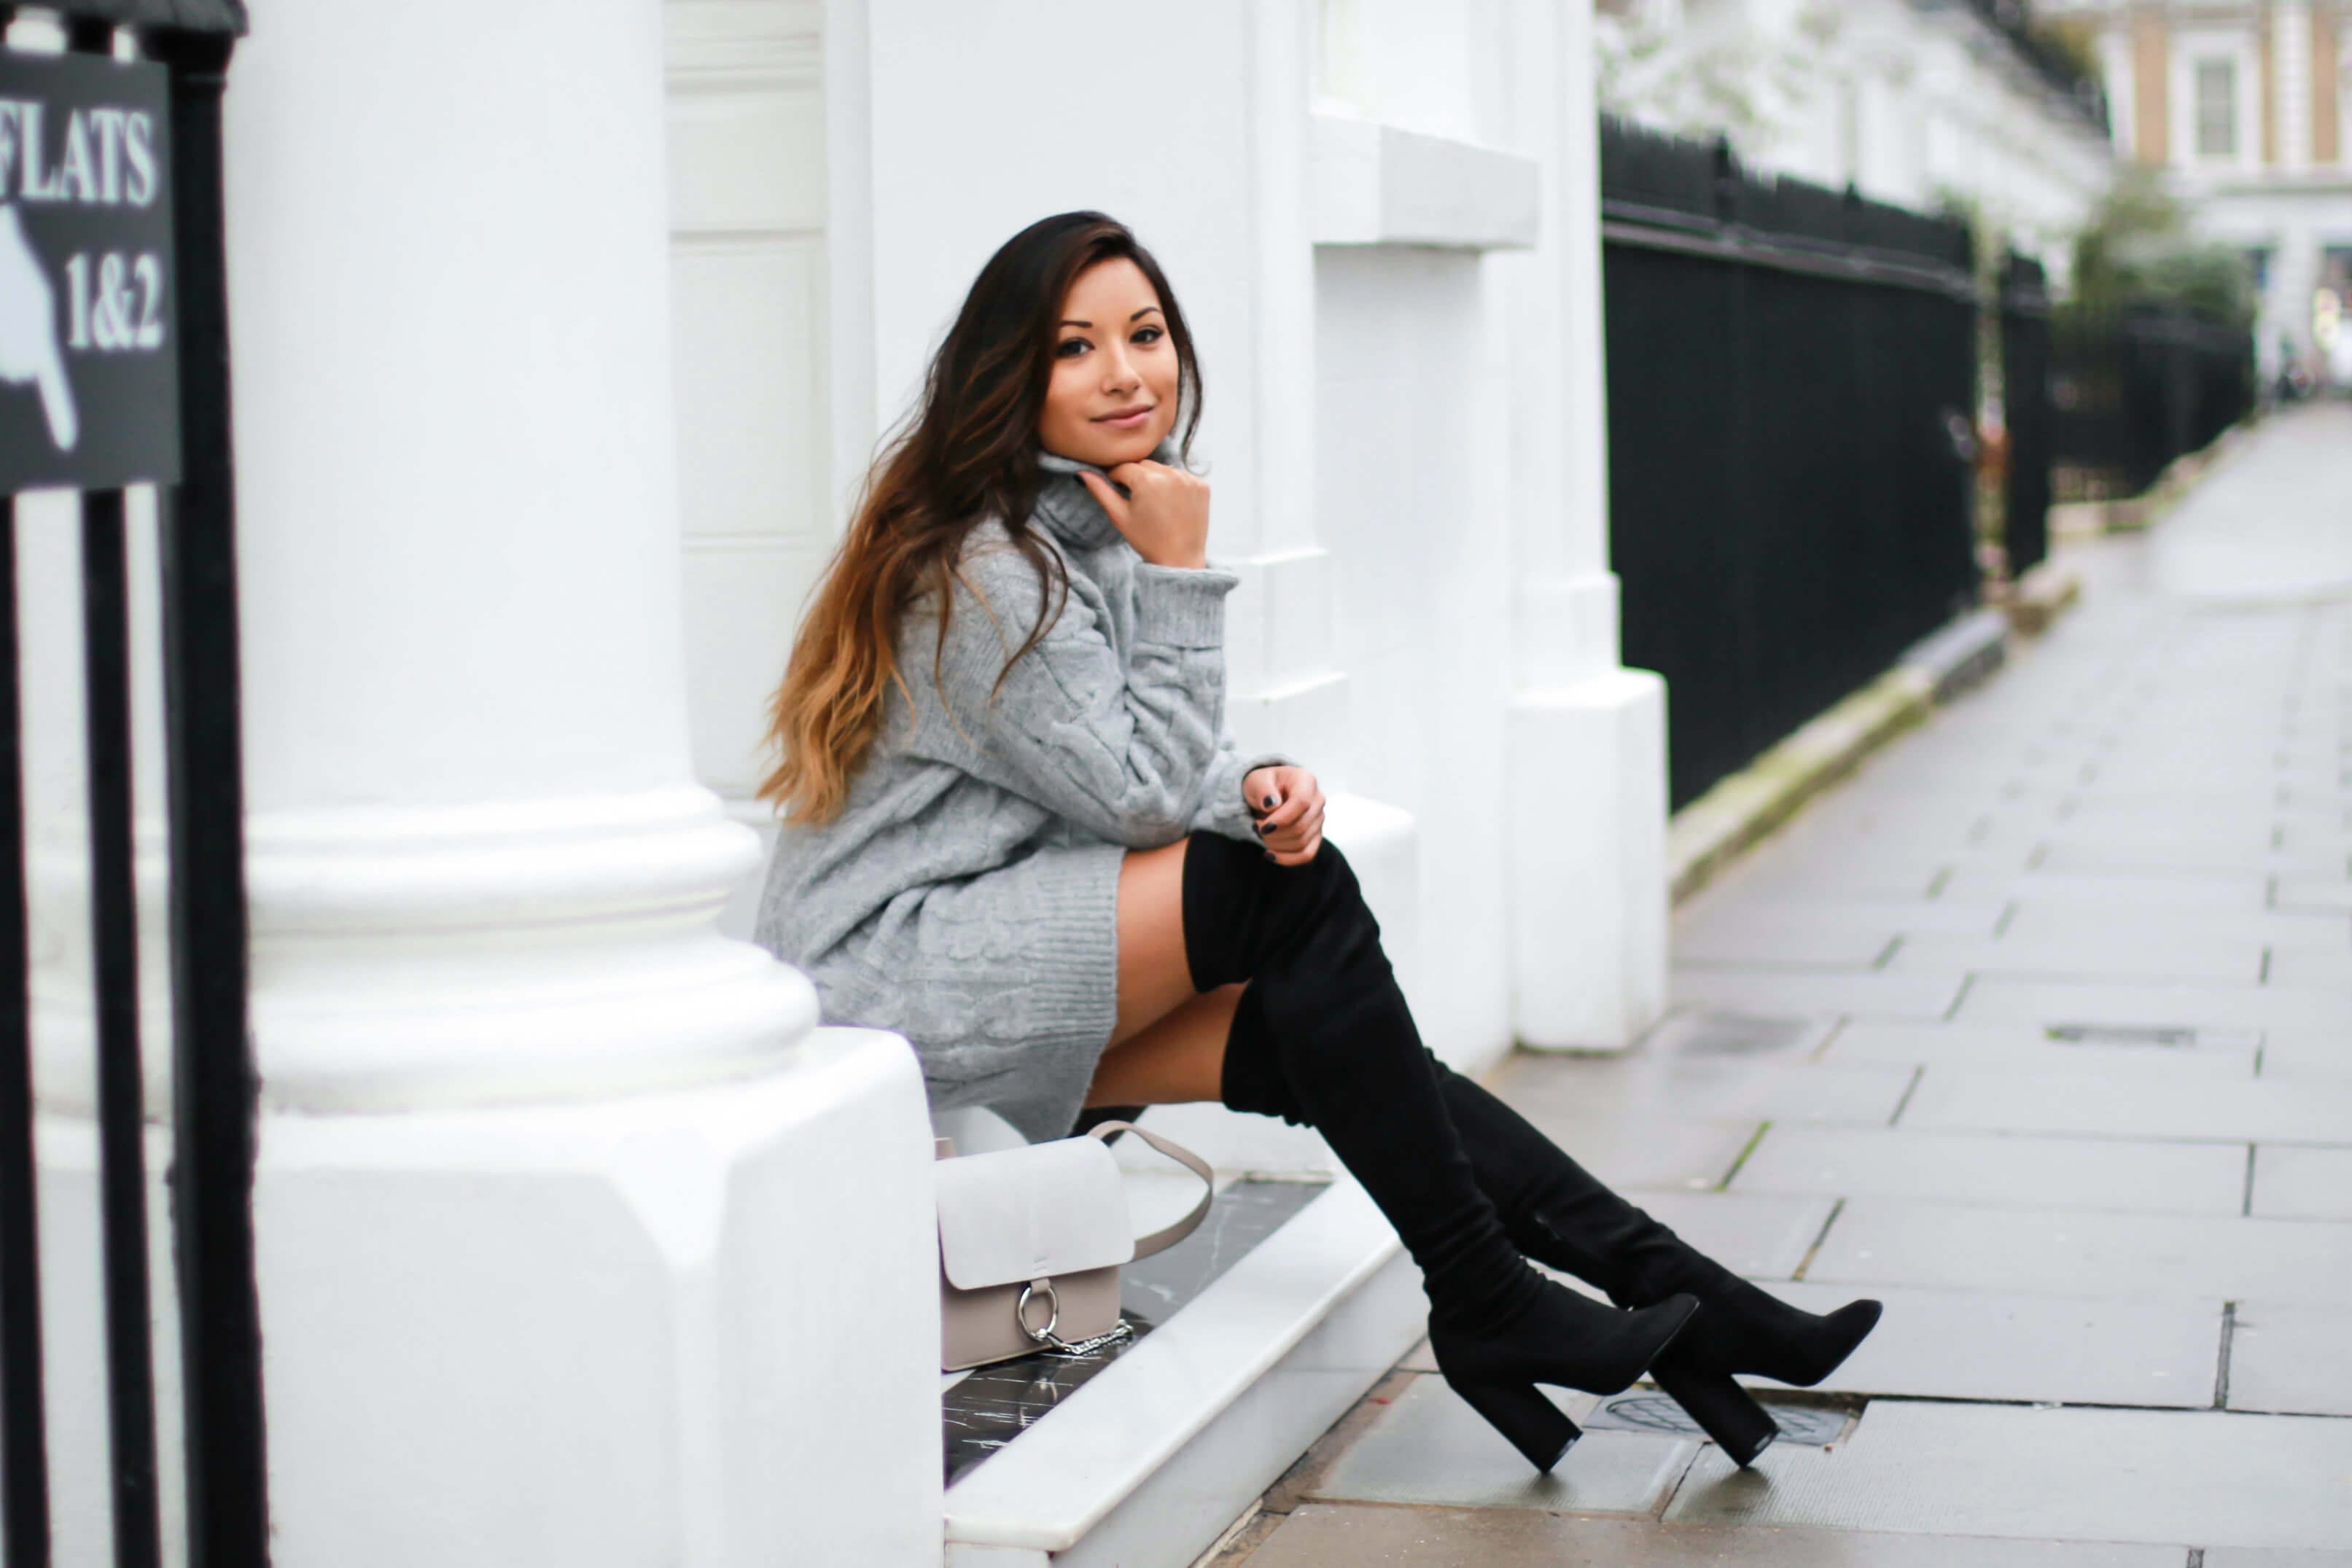 How to Wear Over-the-Knee Boots by Body Type